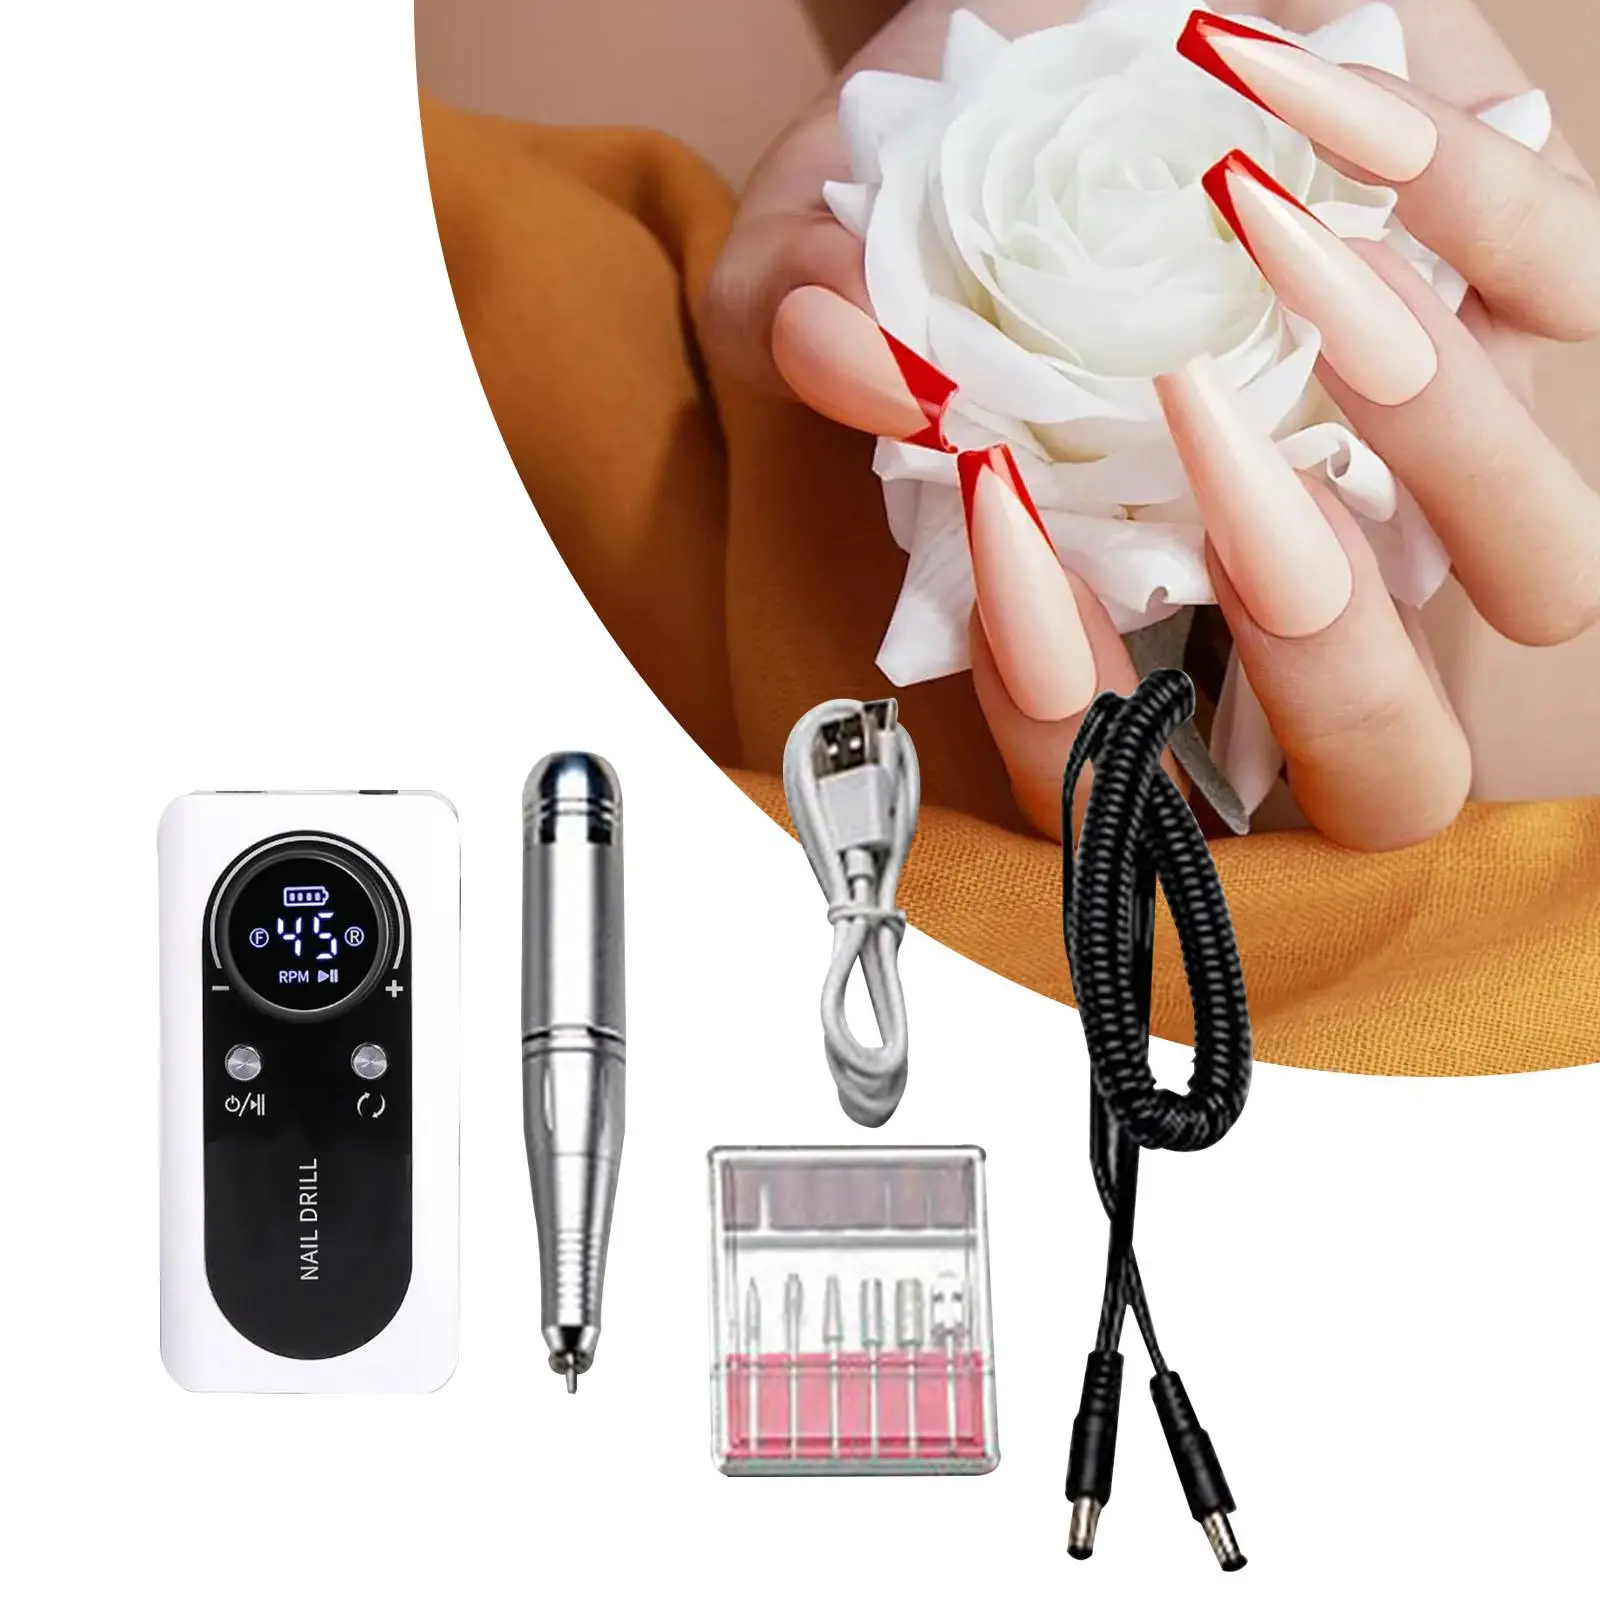 Electric Nail Drill Machine Manicure Pedicure Kits, Professional Compact Portable Nail Drill for Trimming, Cutting Polishing